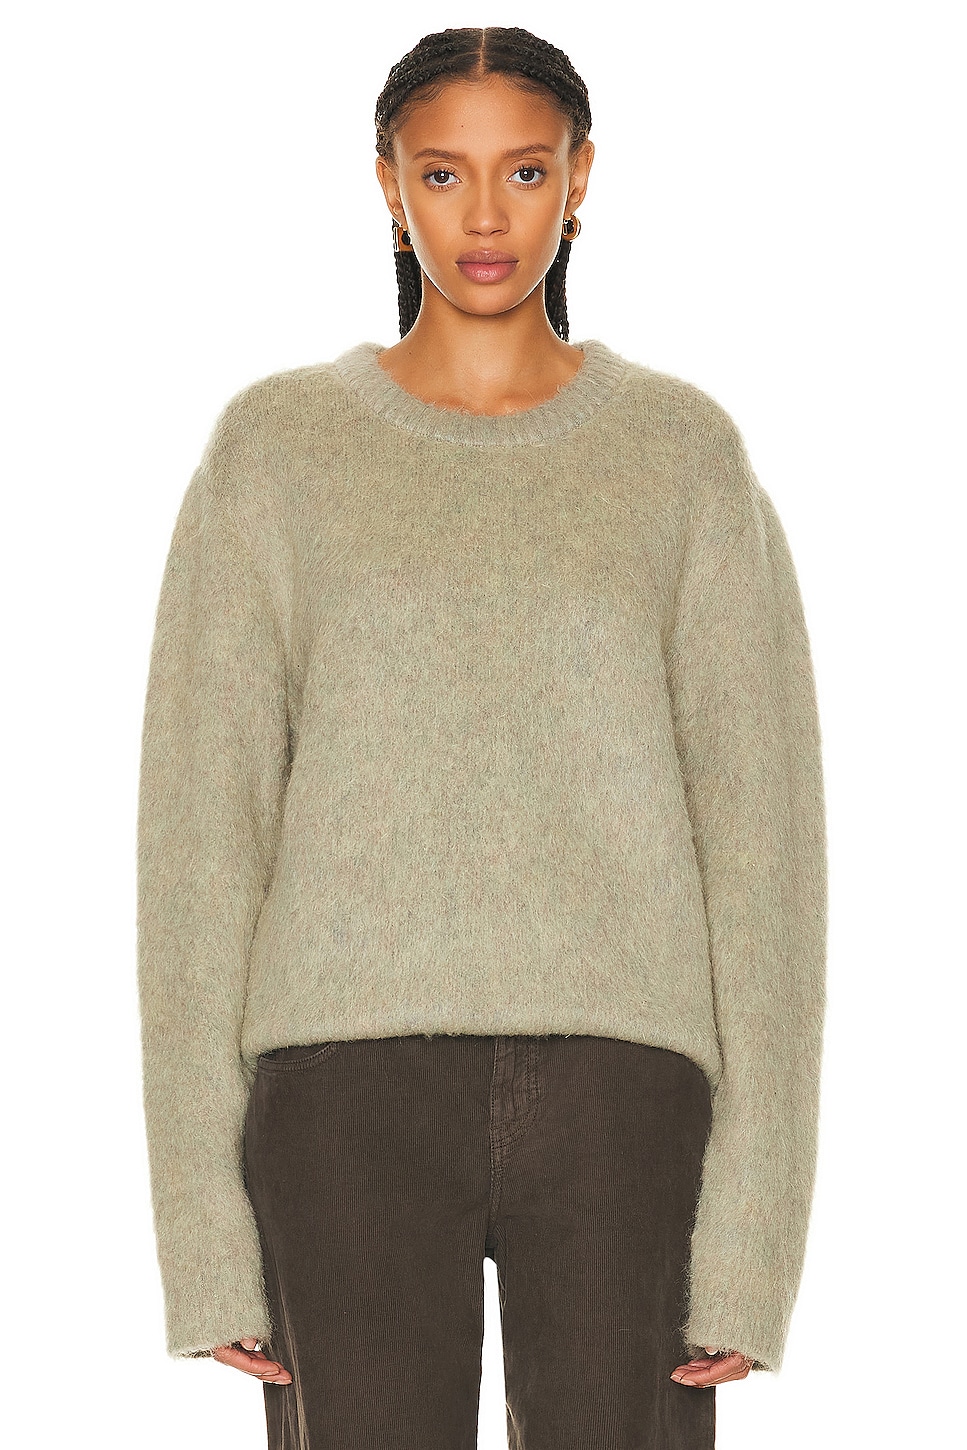 Lemaire Brushed Sweater in Meadow Melange | FWRD